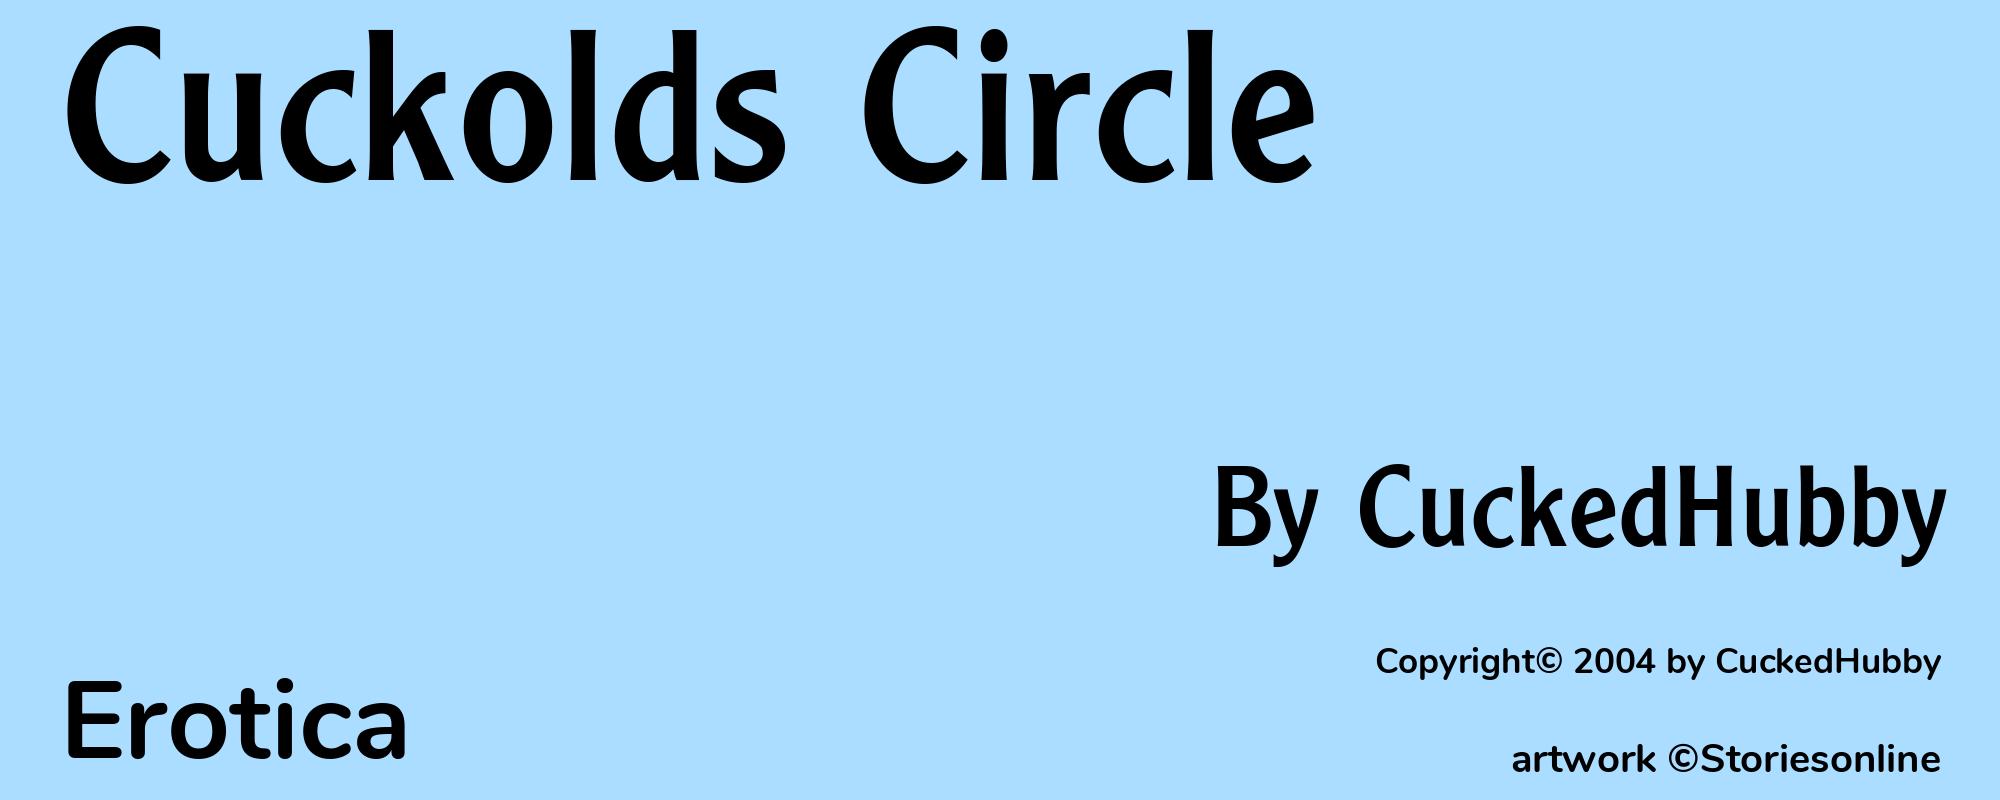 Cuckolds Circle - Cover